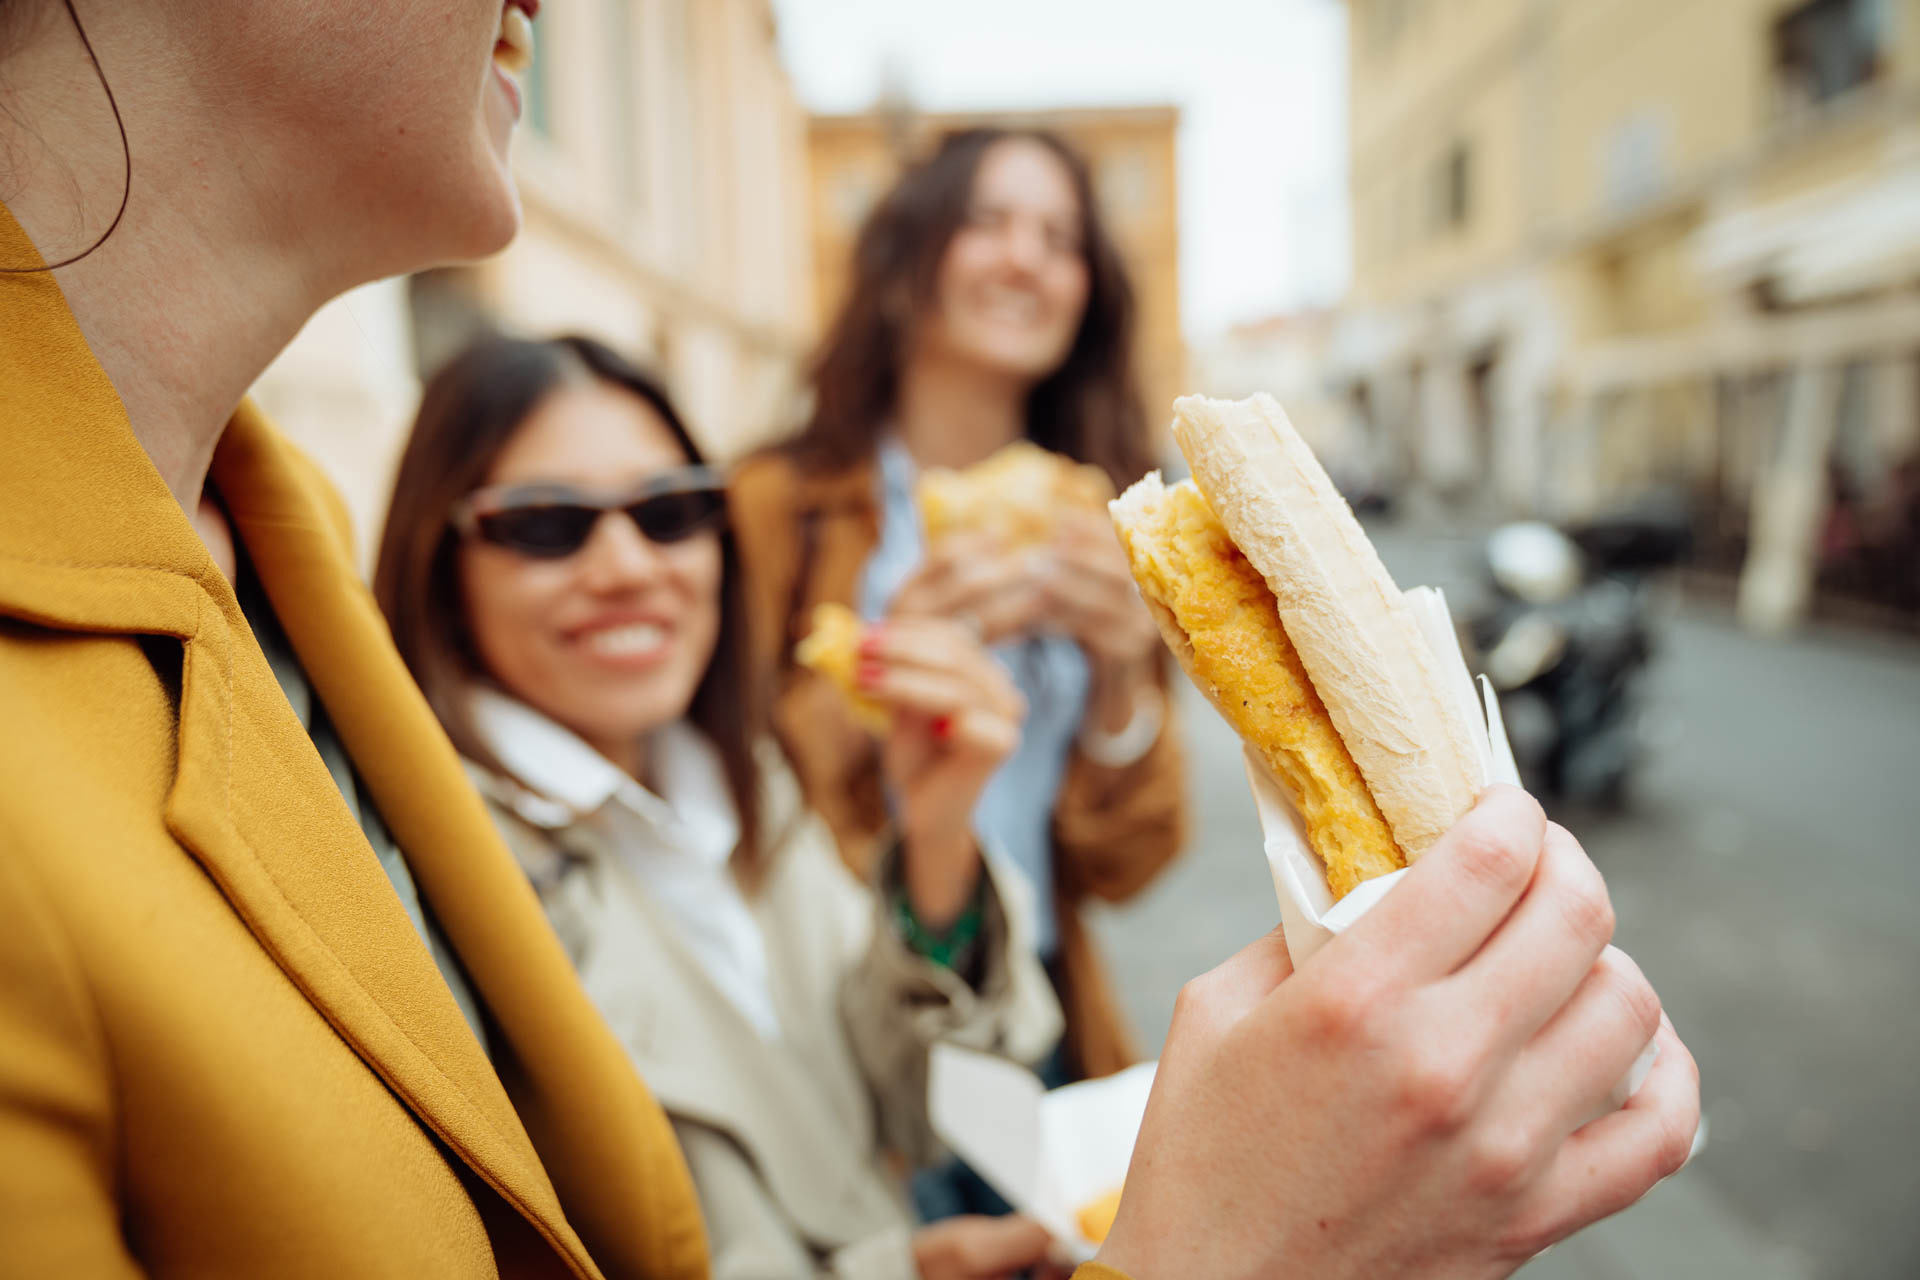 Livorno’s typical street food